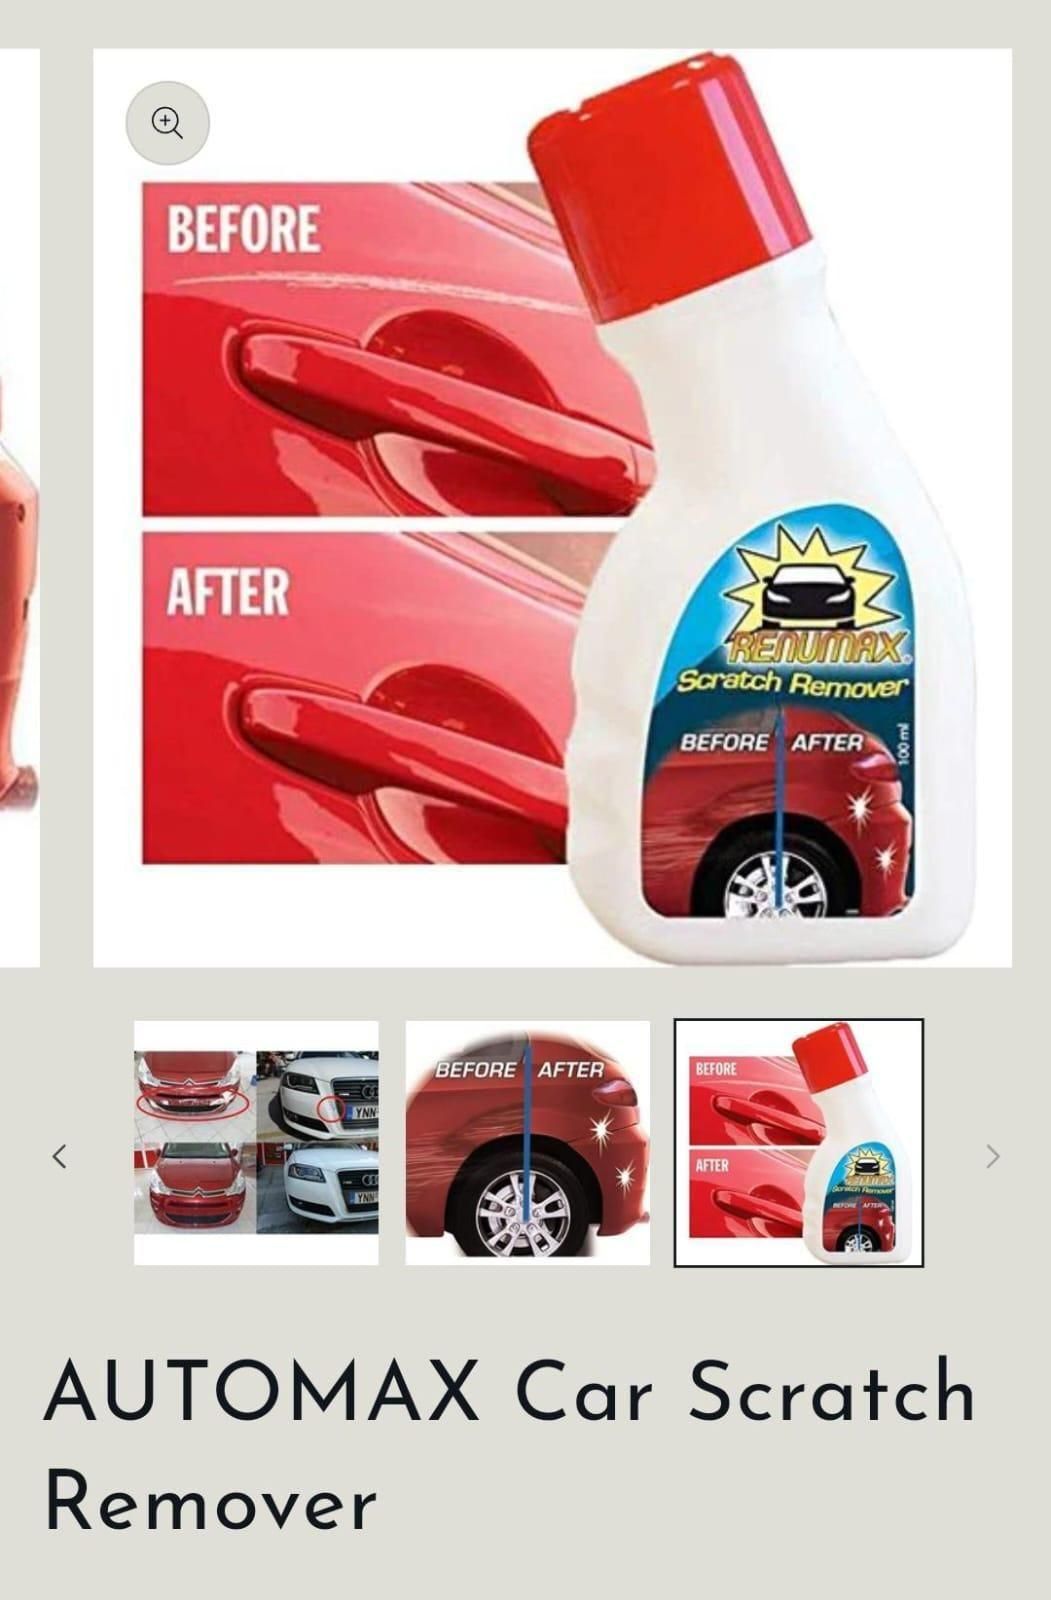 Scratch Remover Quickly and Easily Removes Scratches and Scrapes Liquid for All Car Bike (100 ml) (Pack Of 2)